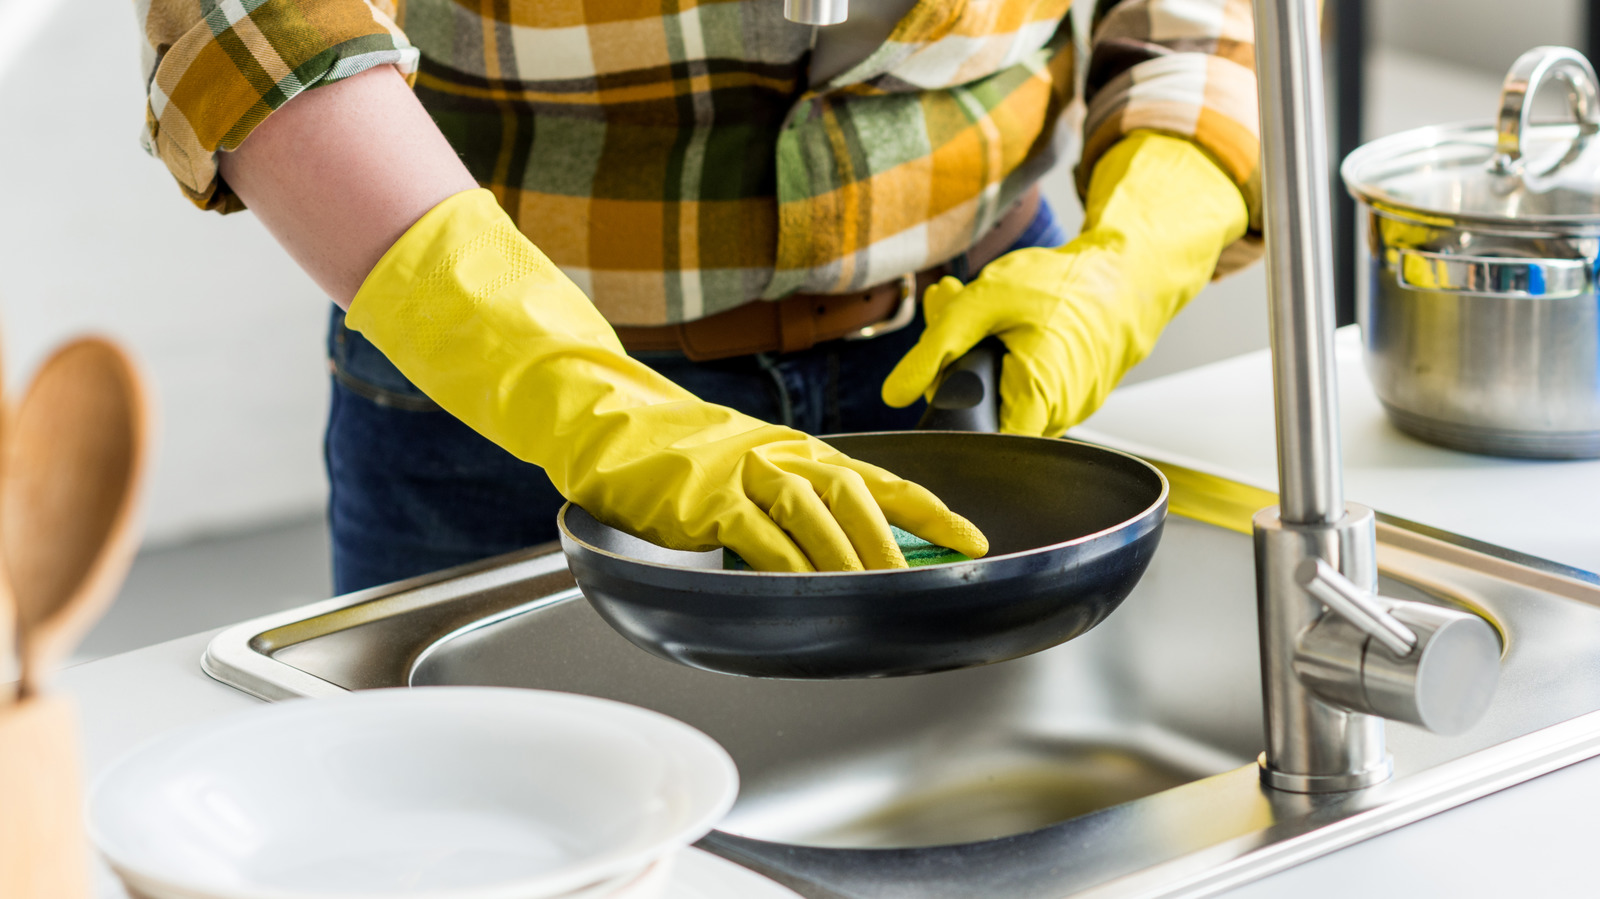 Bar Keepers Friend: The Best Way To Clean Stubborn Pots and Pans